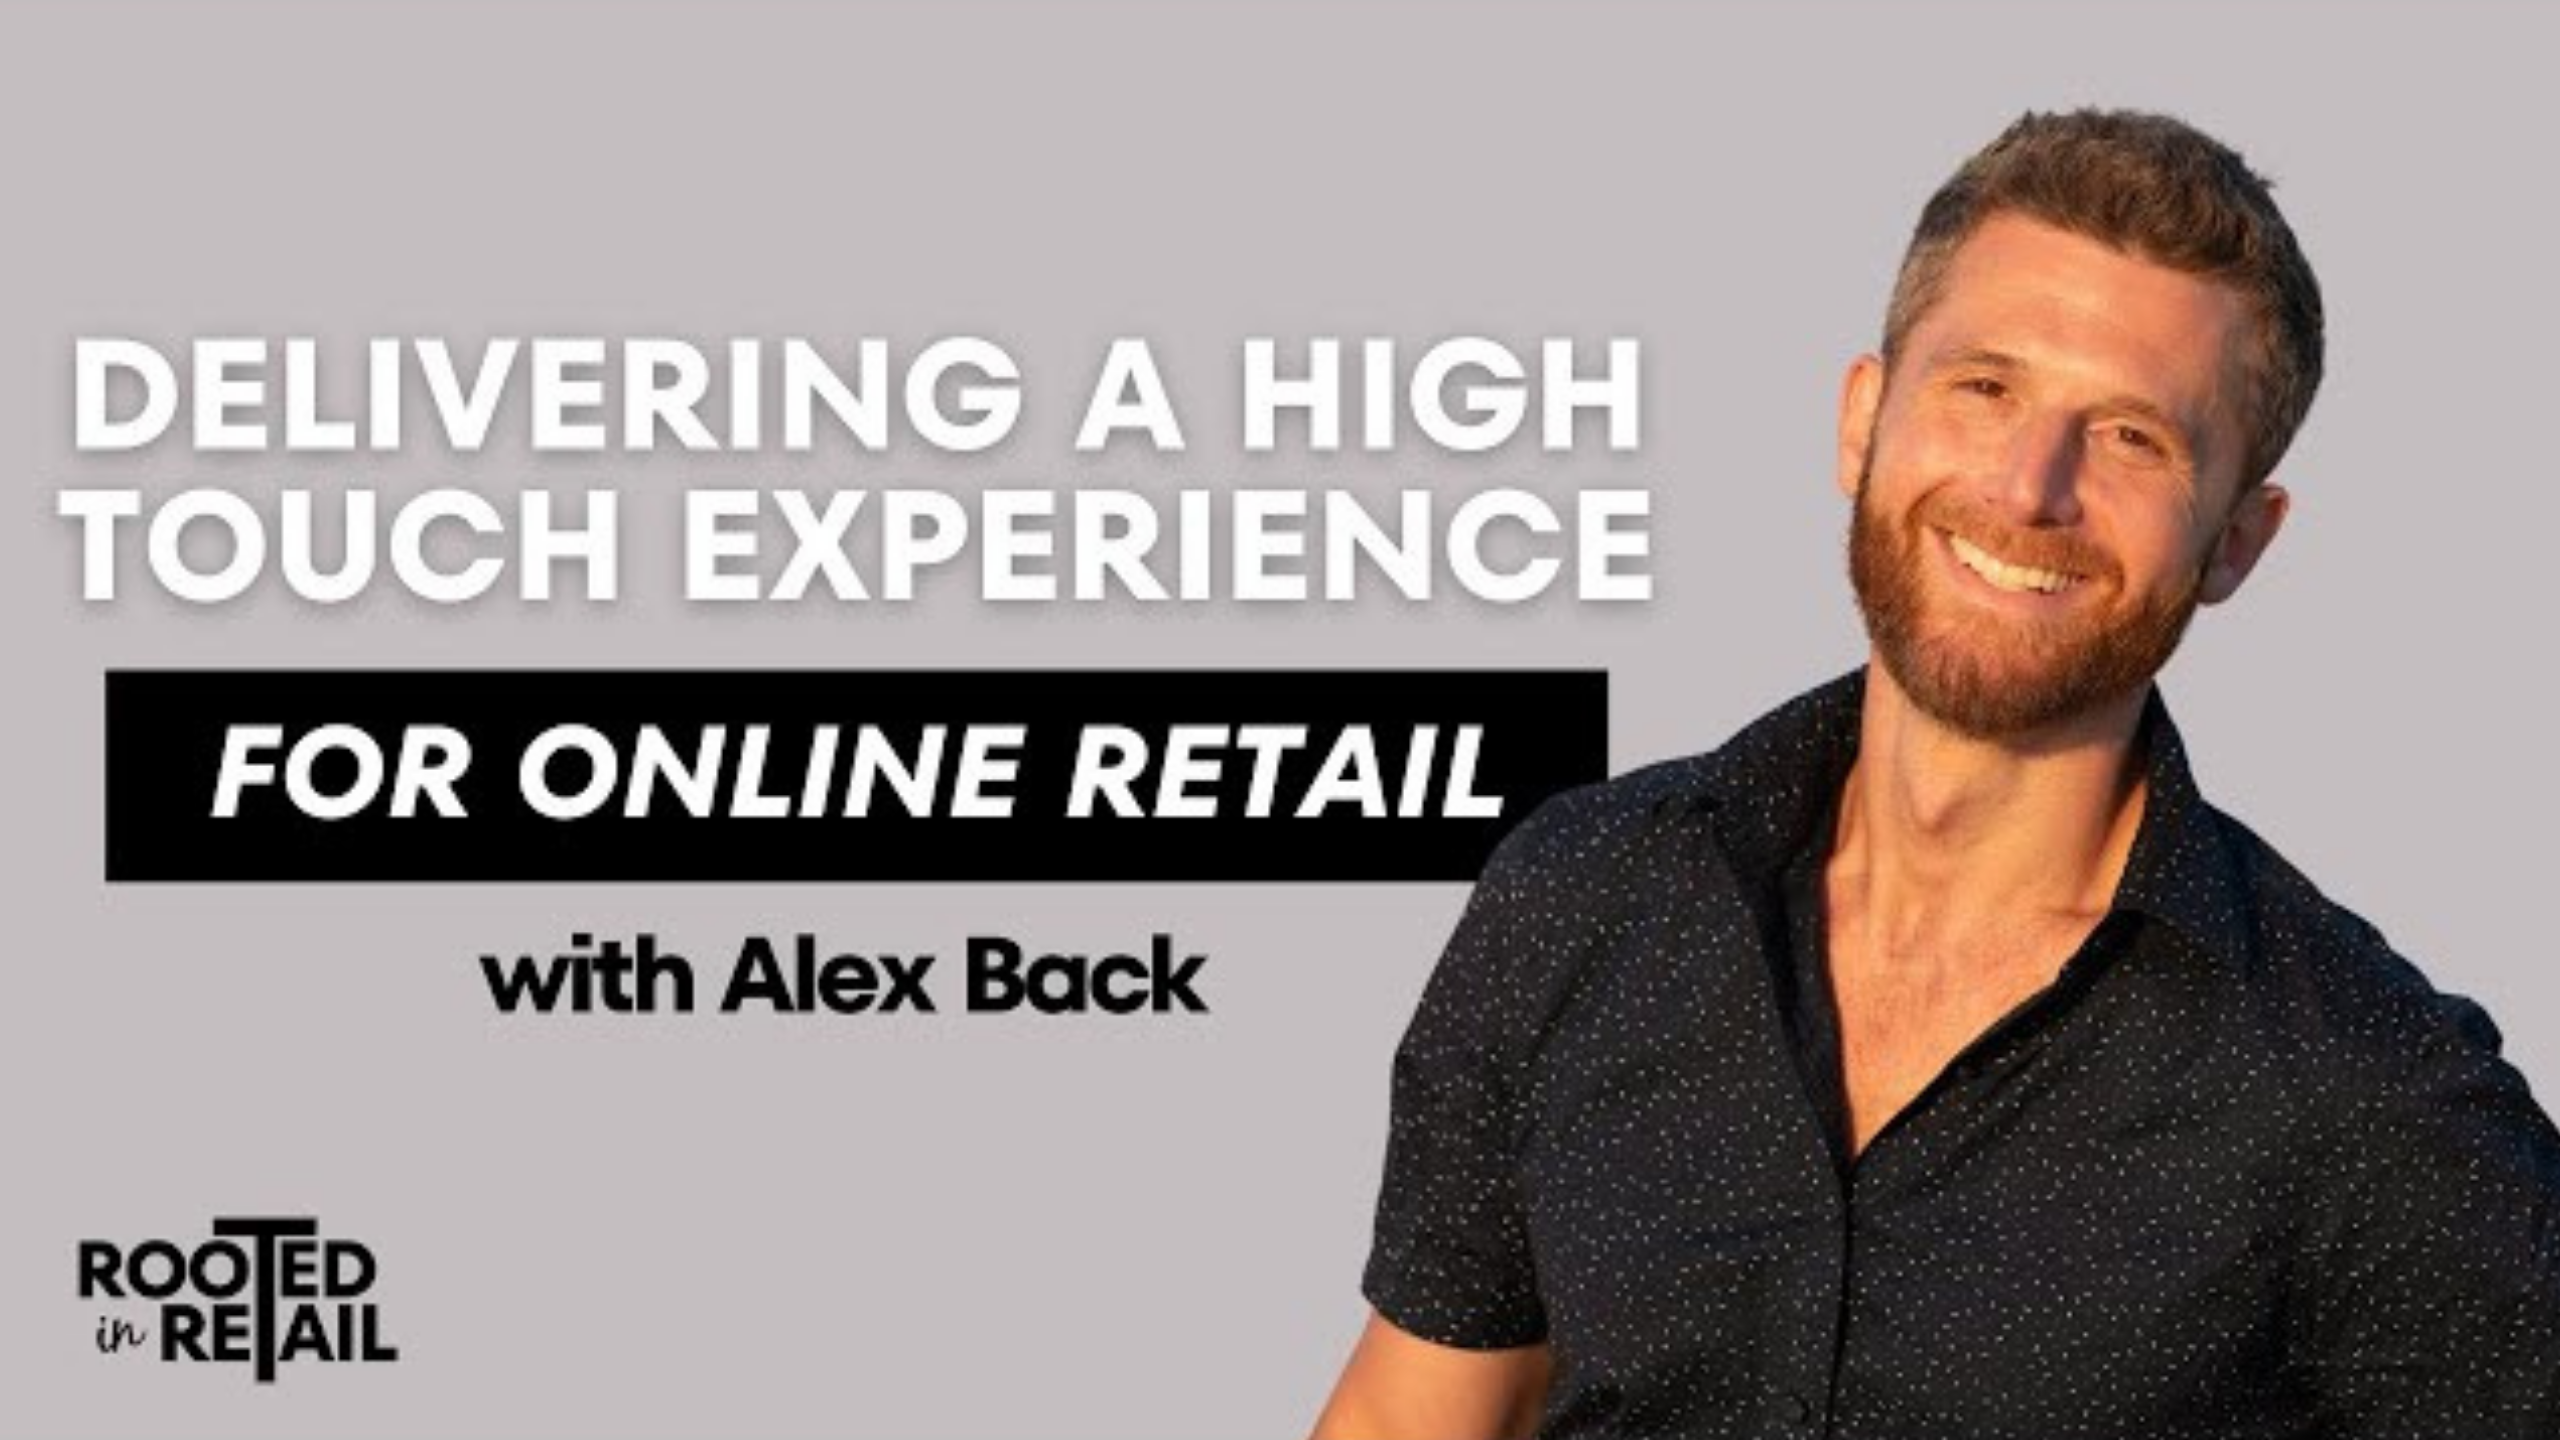 A smiling man with short hair and a beard, wearing a dark polka-dot shirt, is pictured next to text that reads "Delivering a High Touch Experience for Online Retail with Alex Back" and a "Rooted in Retail" logo at the bottom left.